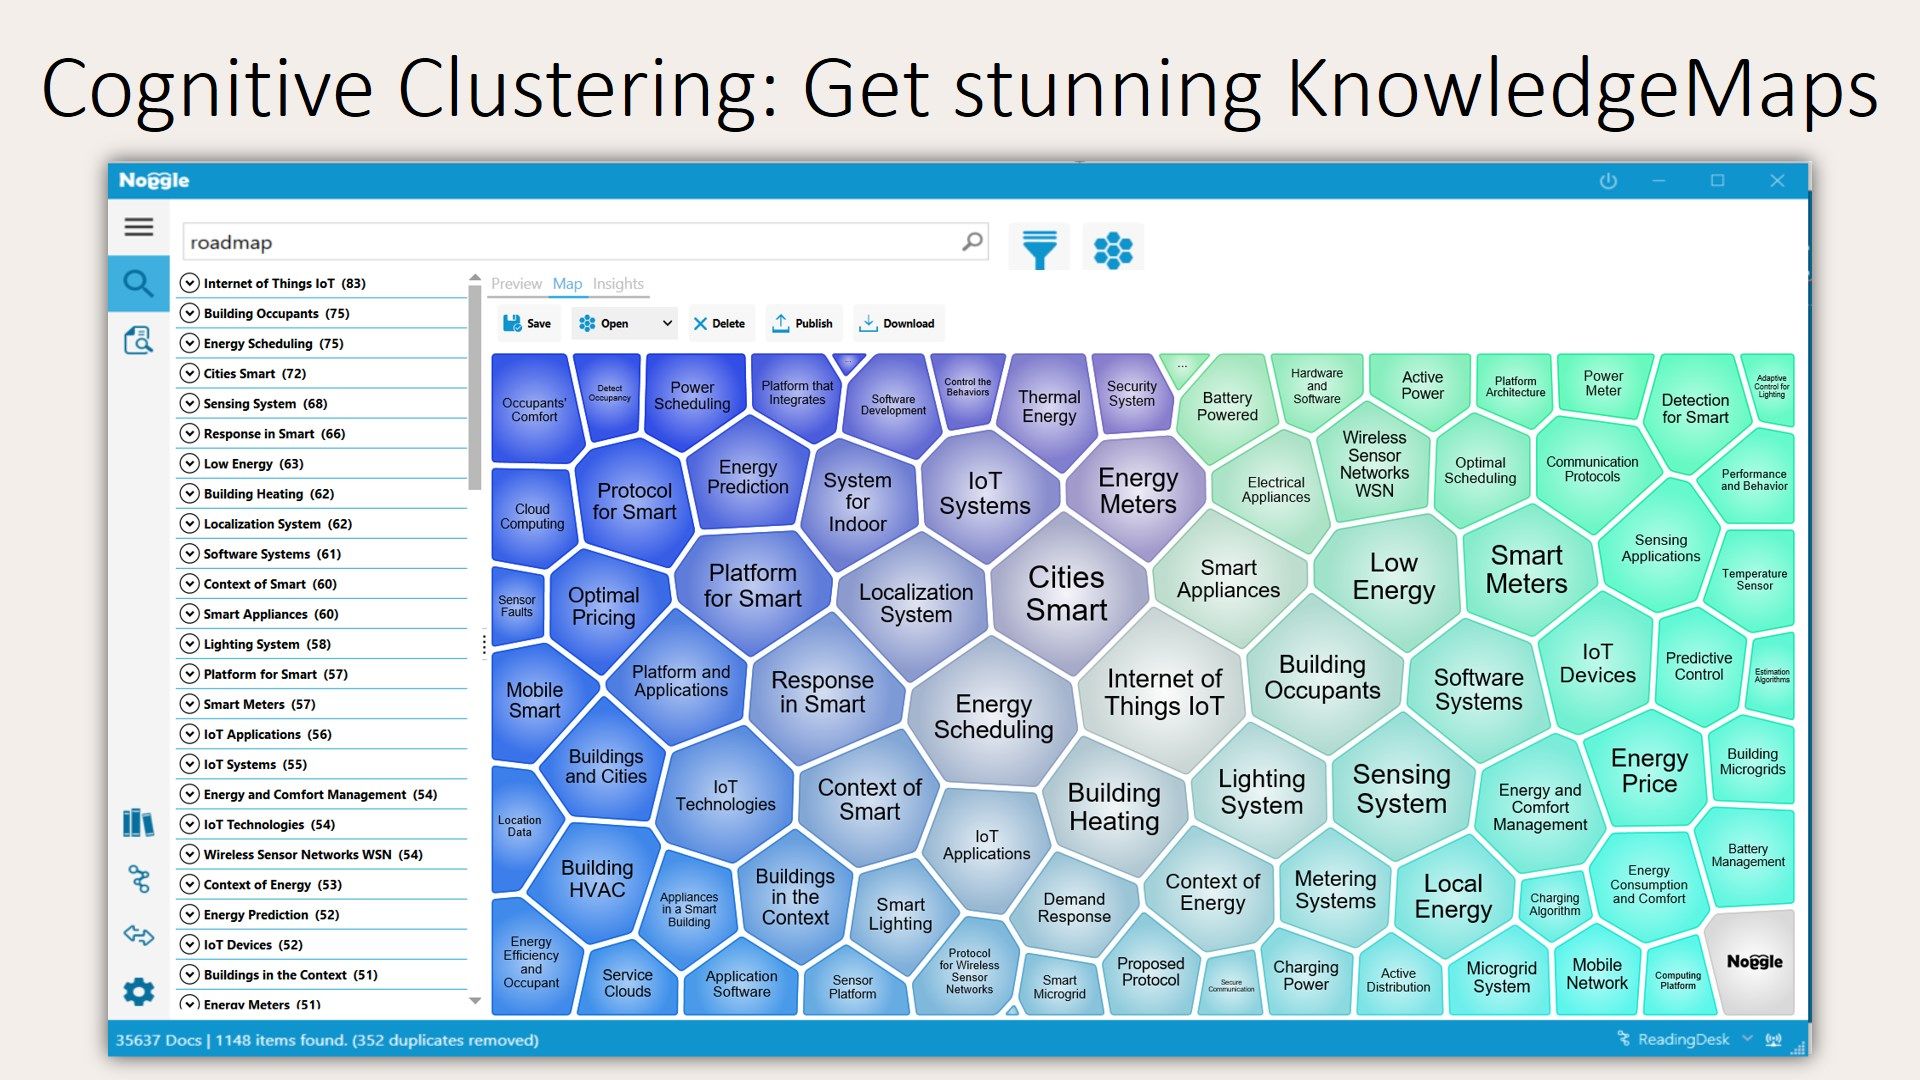 Use cognitive clustering to get auto-generated knowledge maps